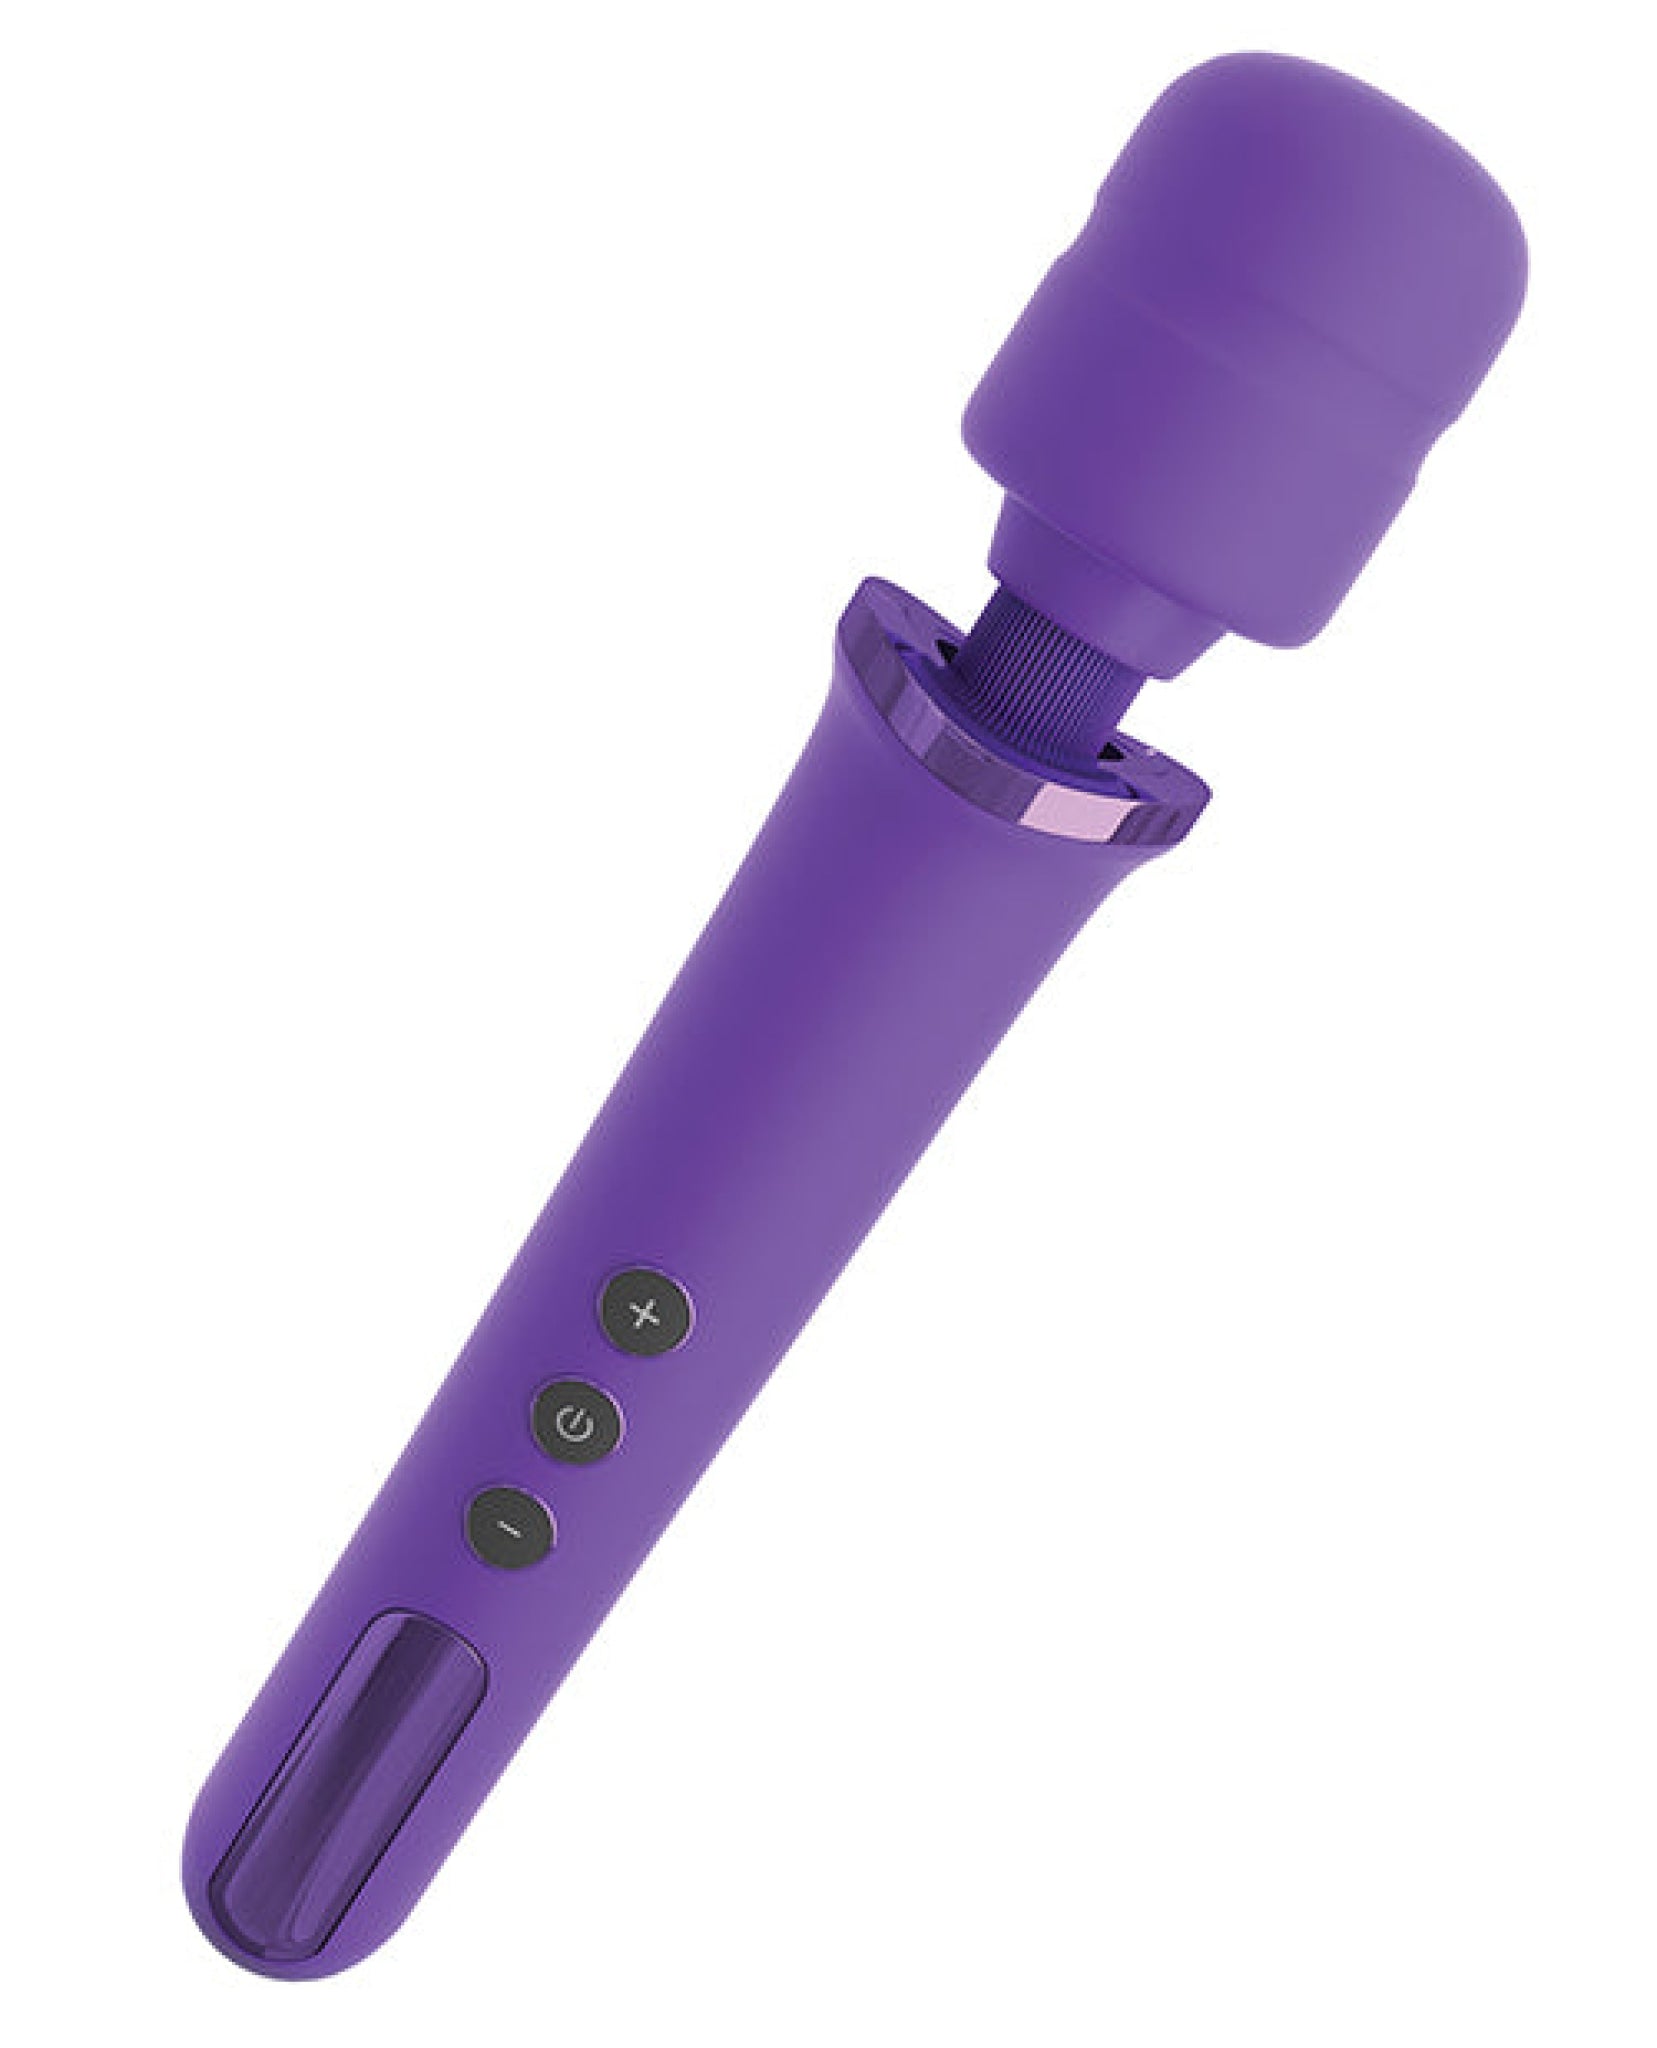 Fantasy For Her Rechargeable Power Wand - Purple Pipedream®